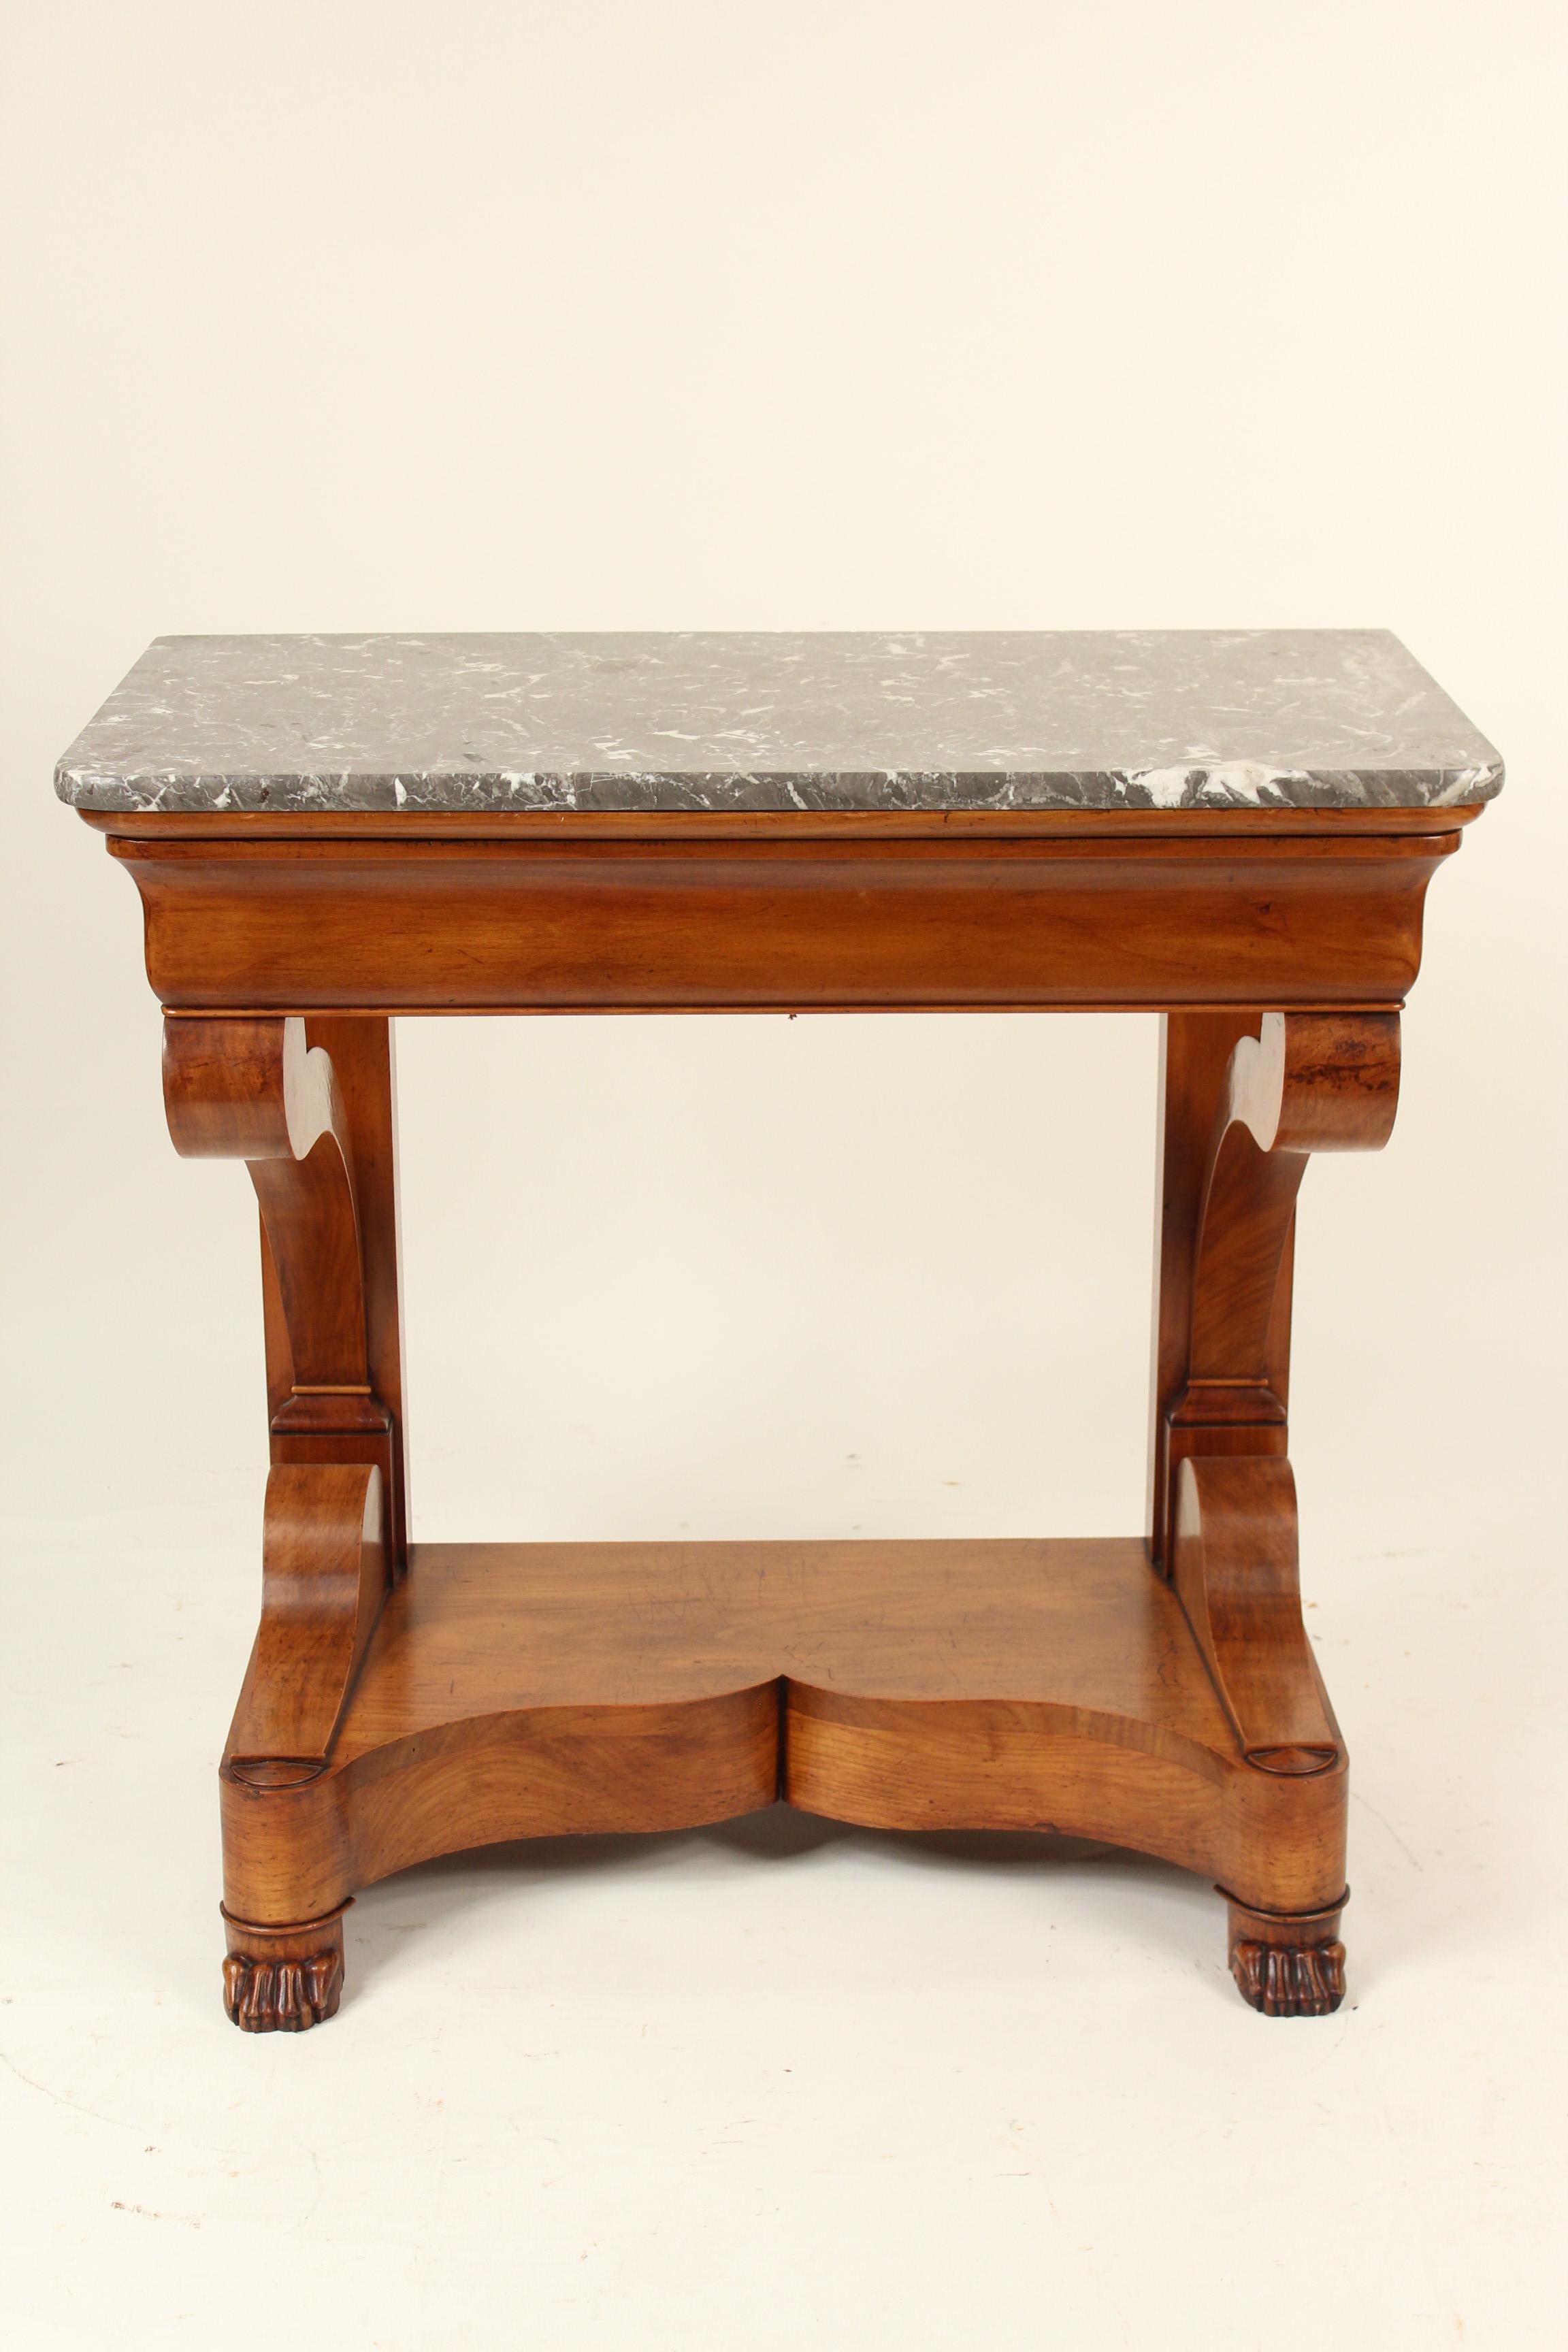 Antique Louis Philippe mahogany marble-top console table, 19th century. Formerly sold by Hideaway House antiques, Los Angeles.